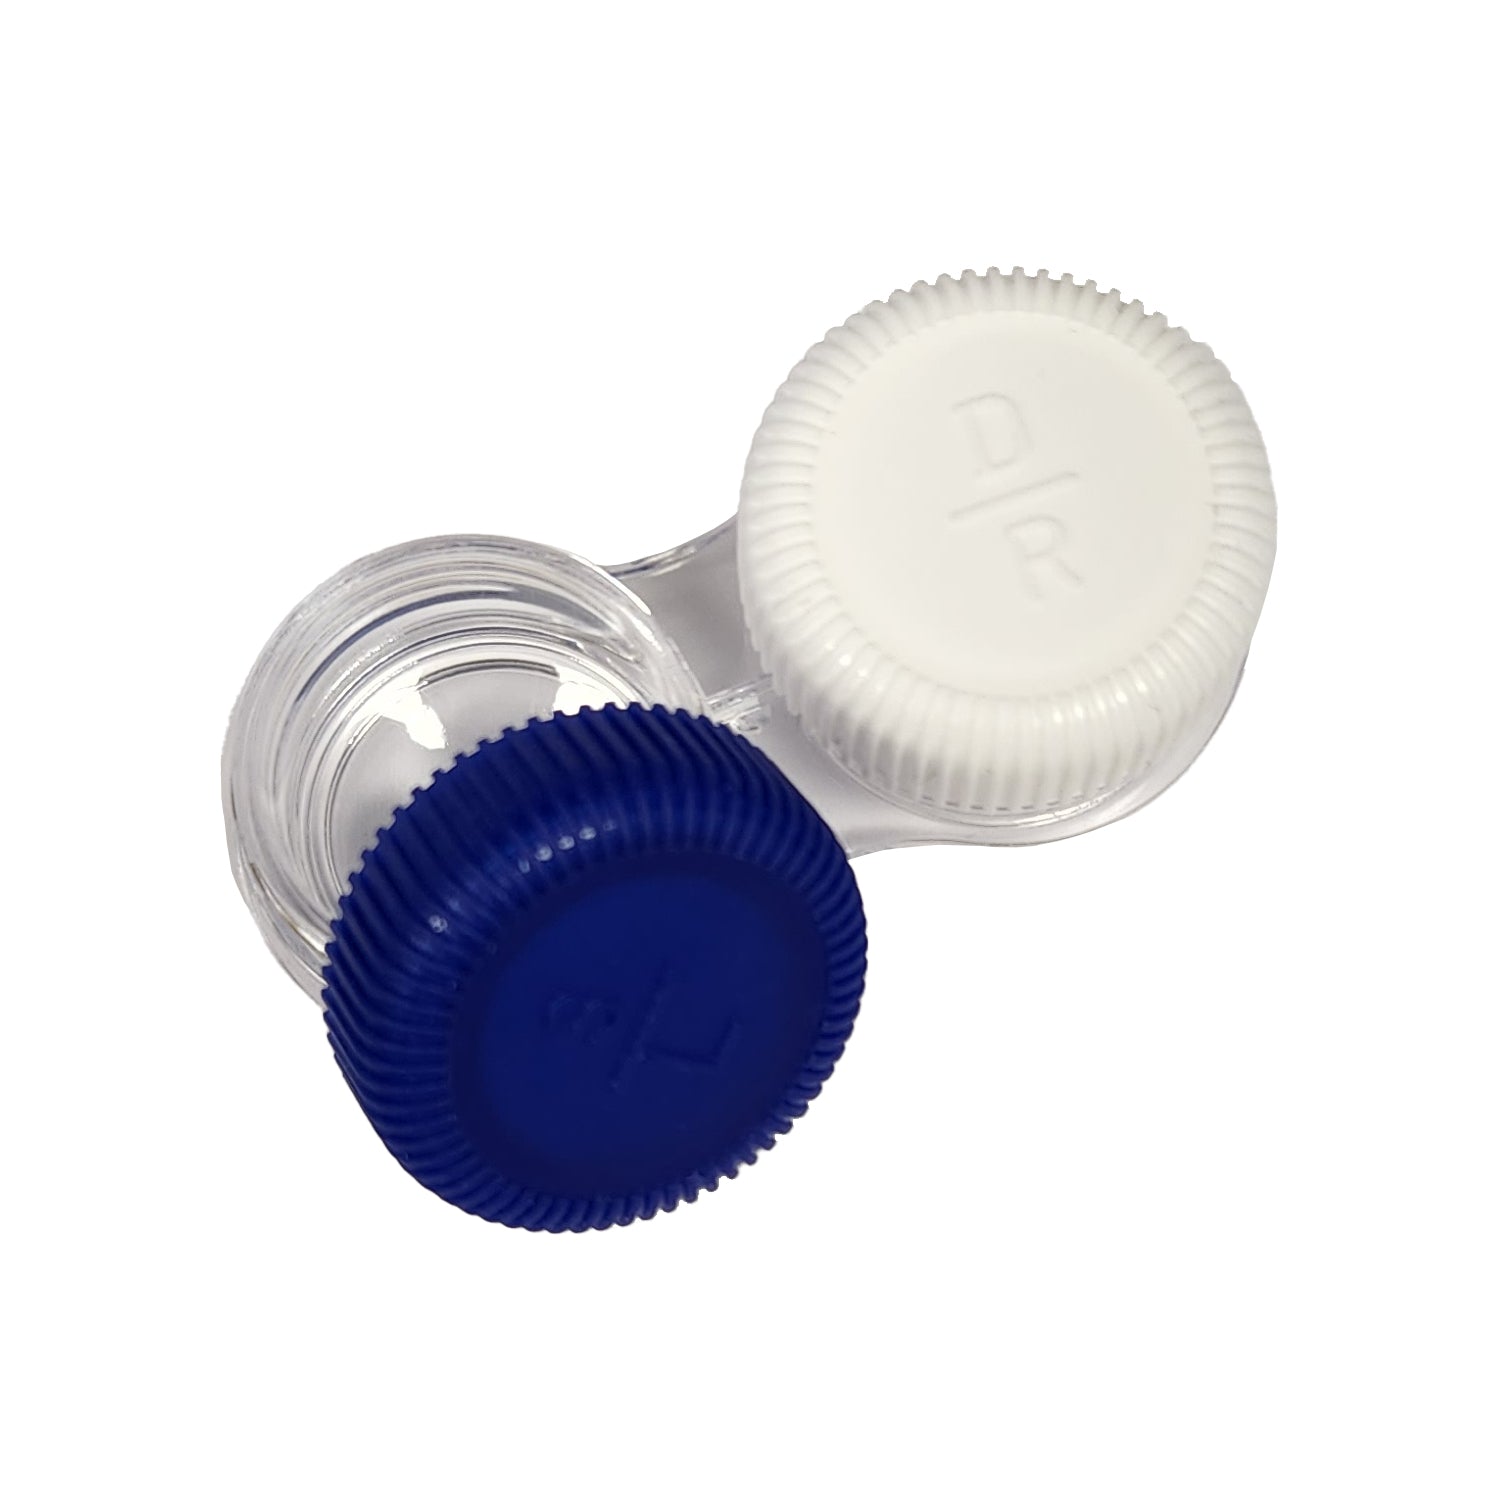 Screw-top Cases for Soft Contact Lenses